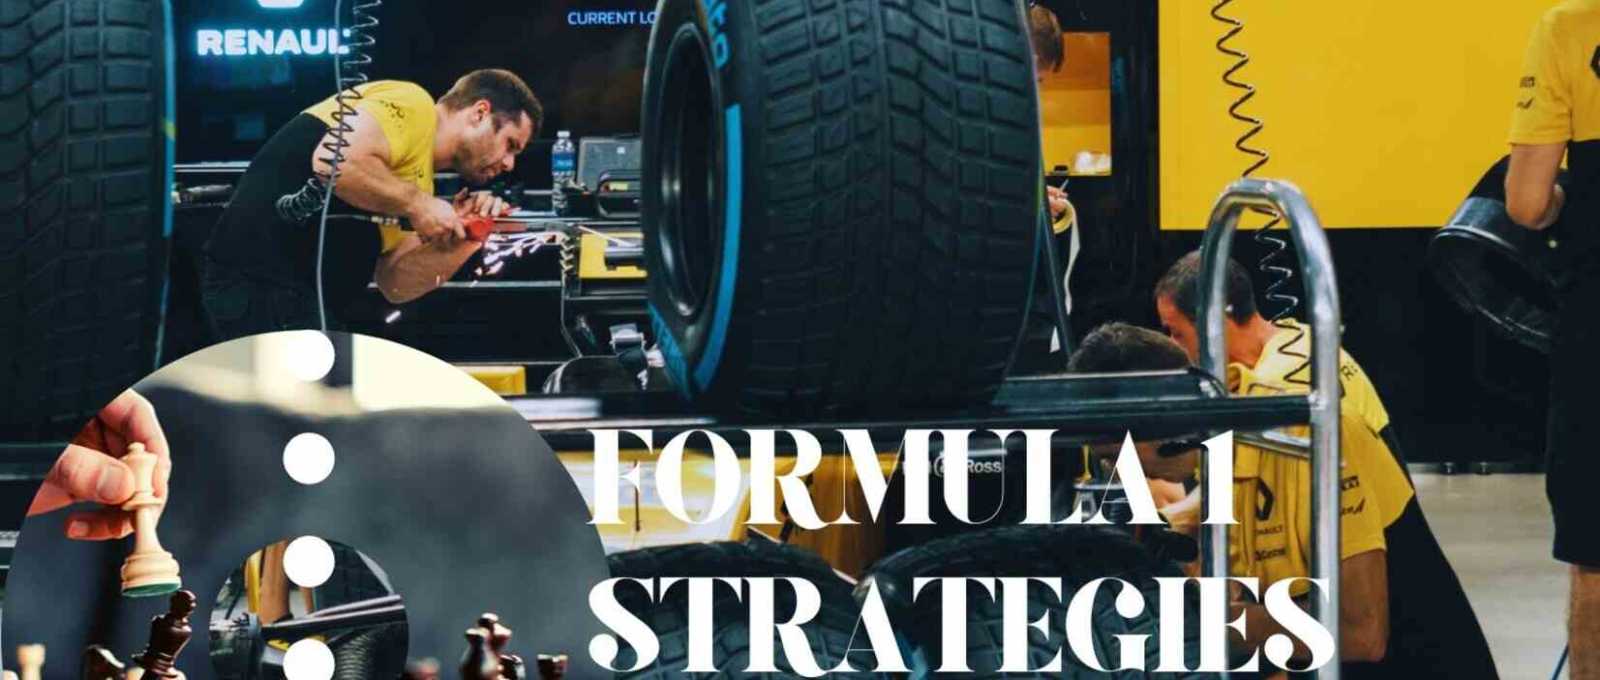 F1 strategy explained